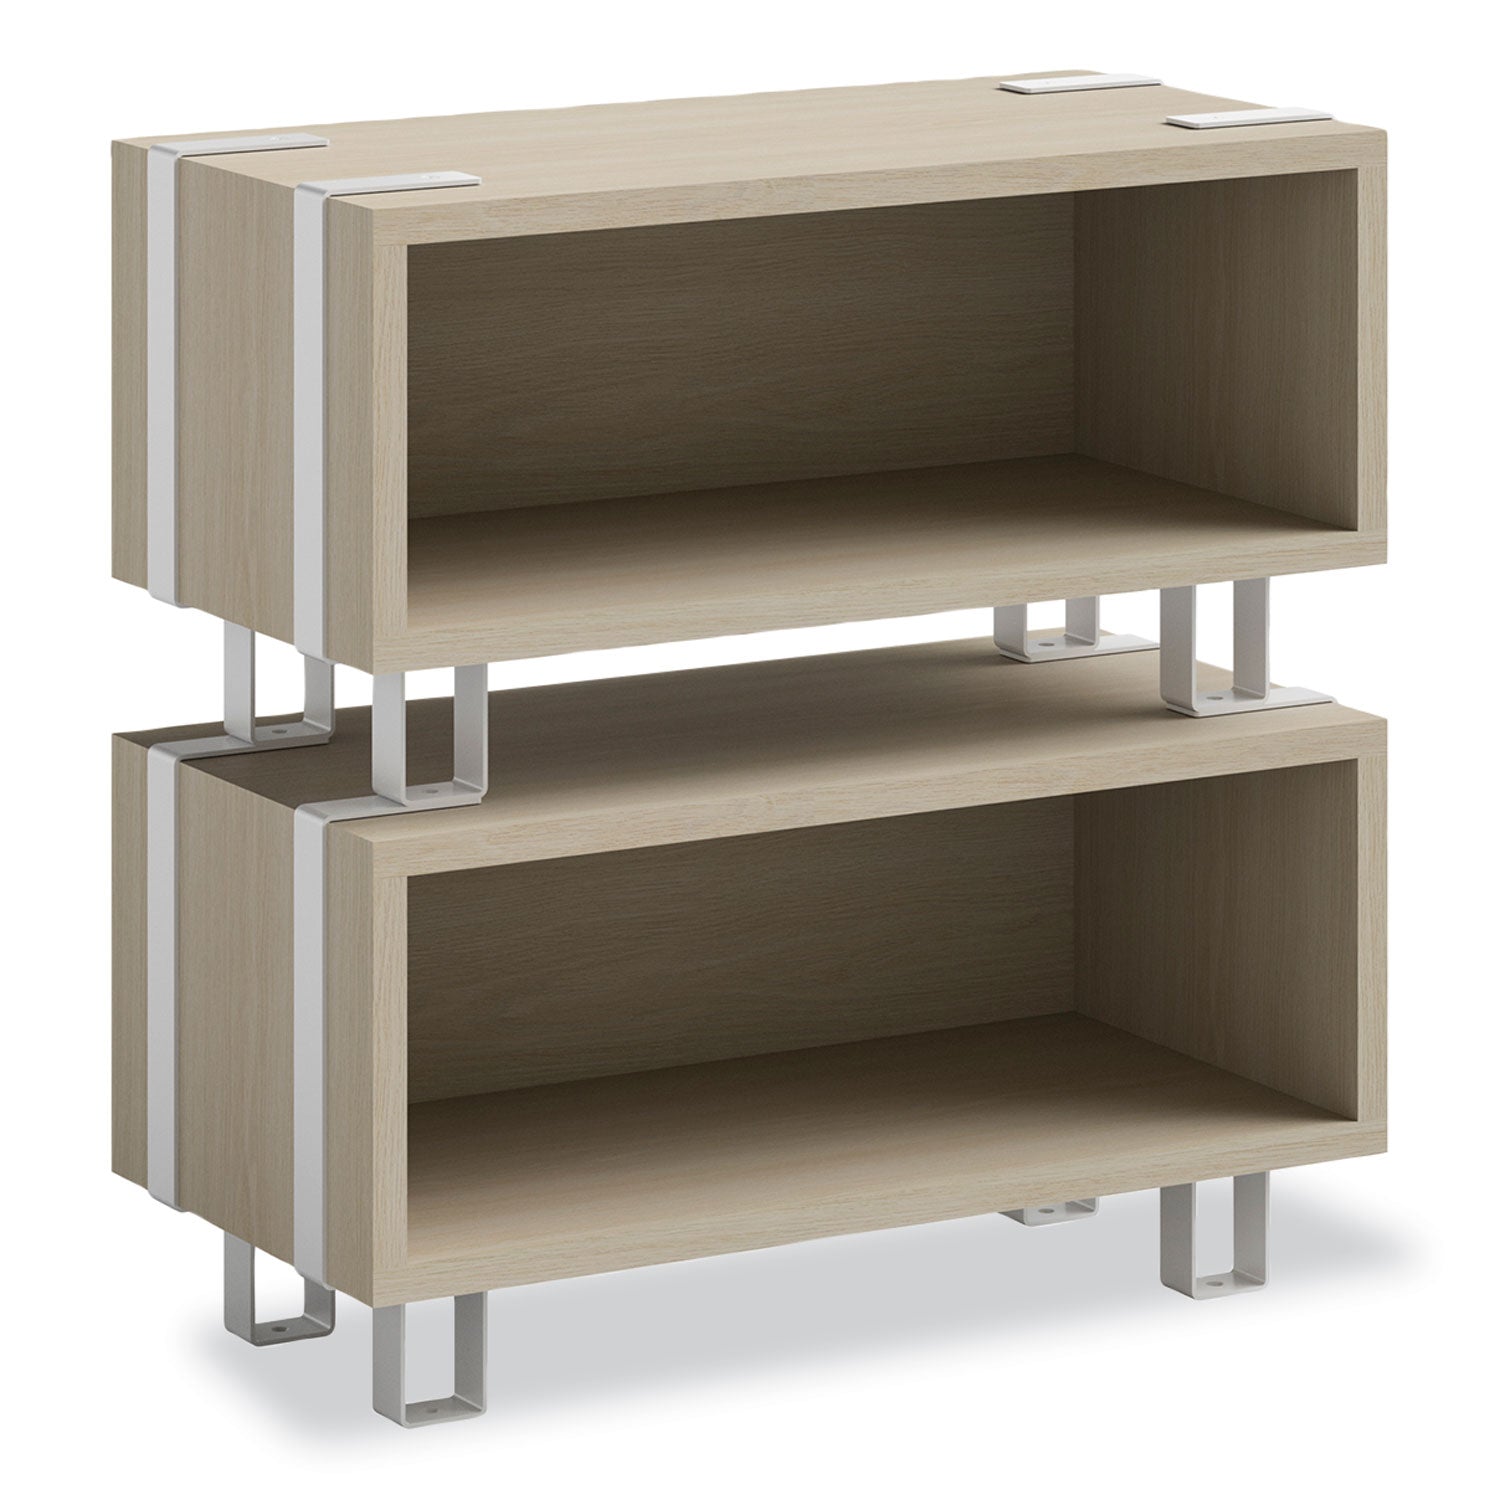 ready-home-office-small-stackable-storage-1-shelf-24w-x-12d-x-1225h-beige-white-ships-in-1-3-business-days_saf5510whna - 6